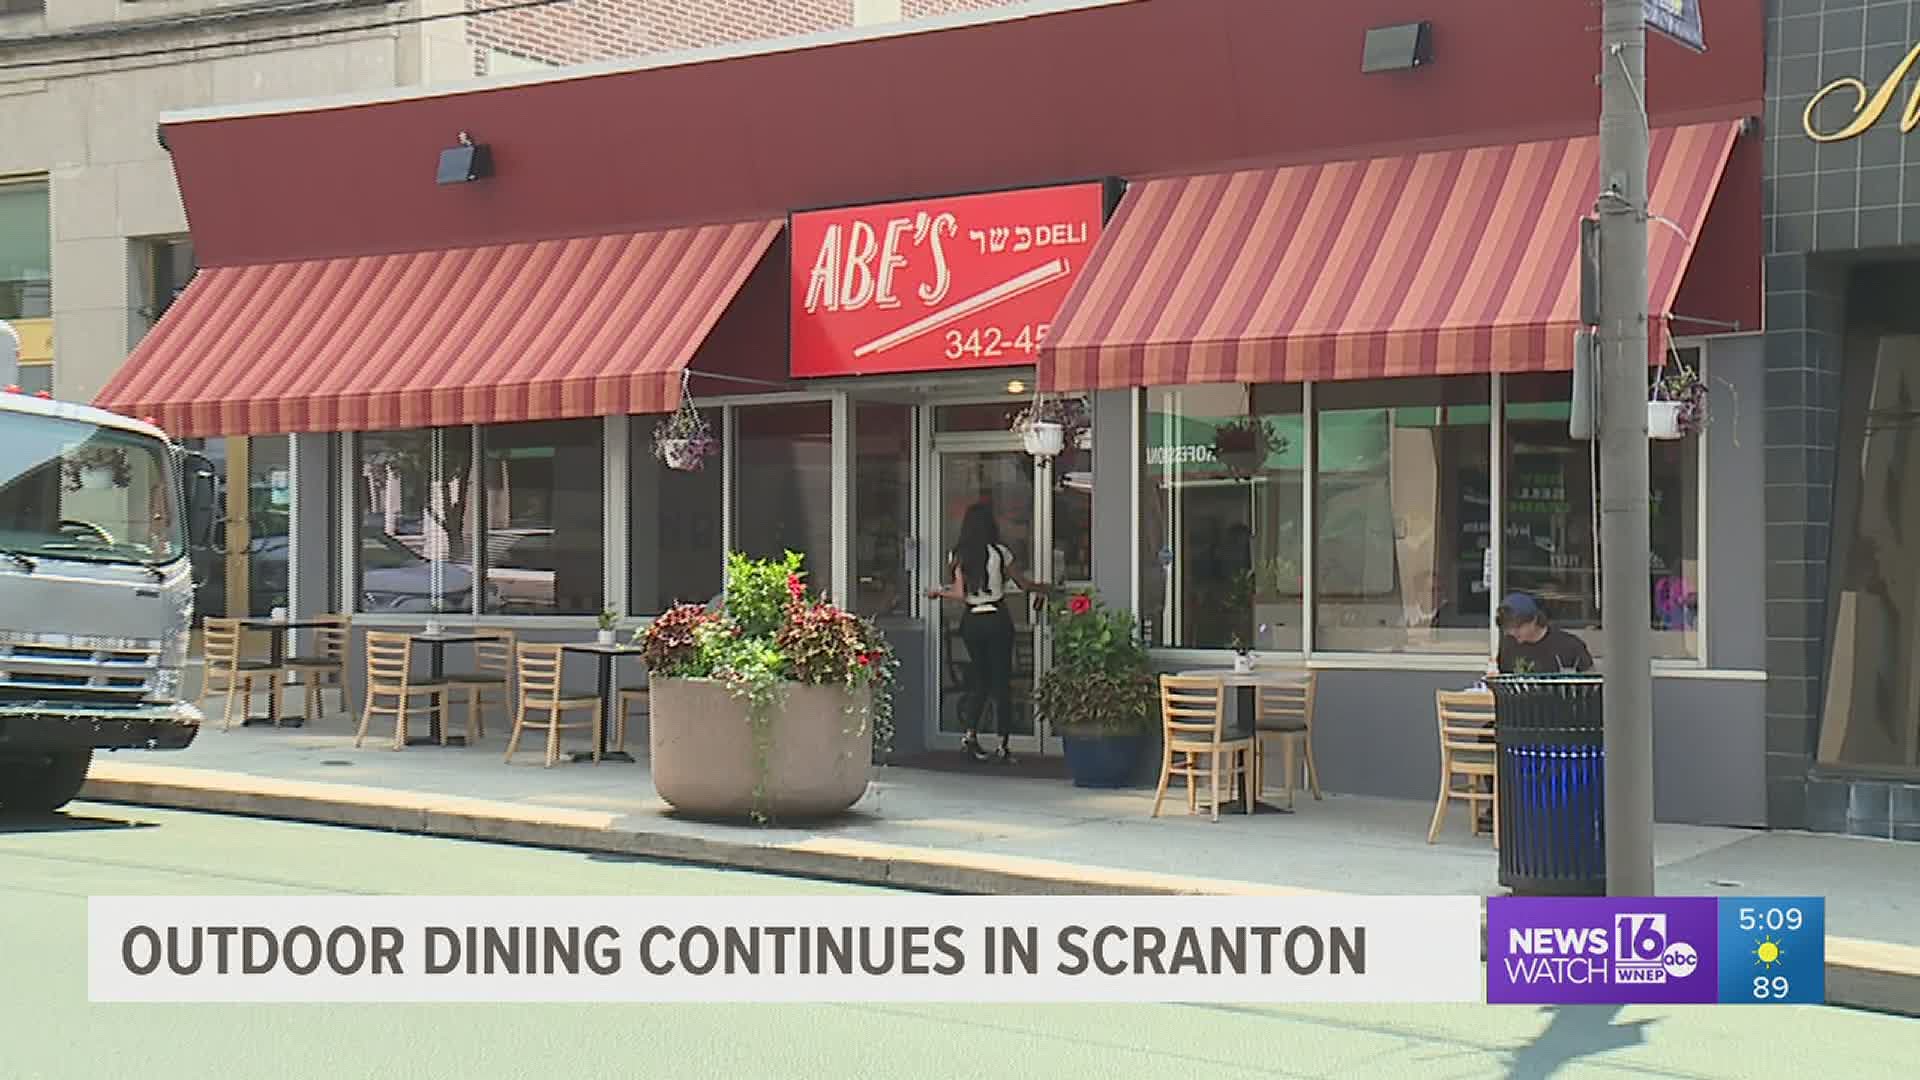 Newswatch 16's Courtney Harrison spoke with restaurant owners about council's vote and what it means for business.